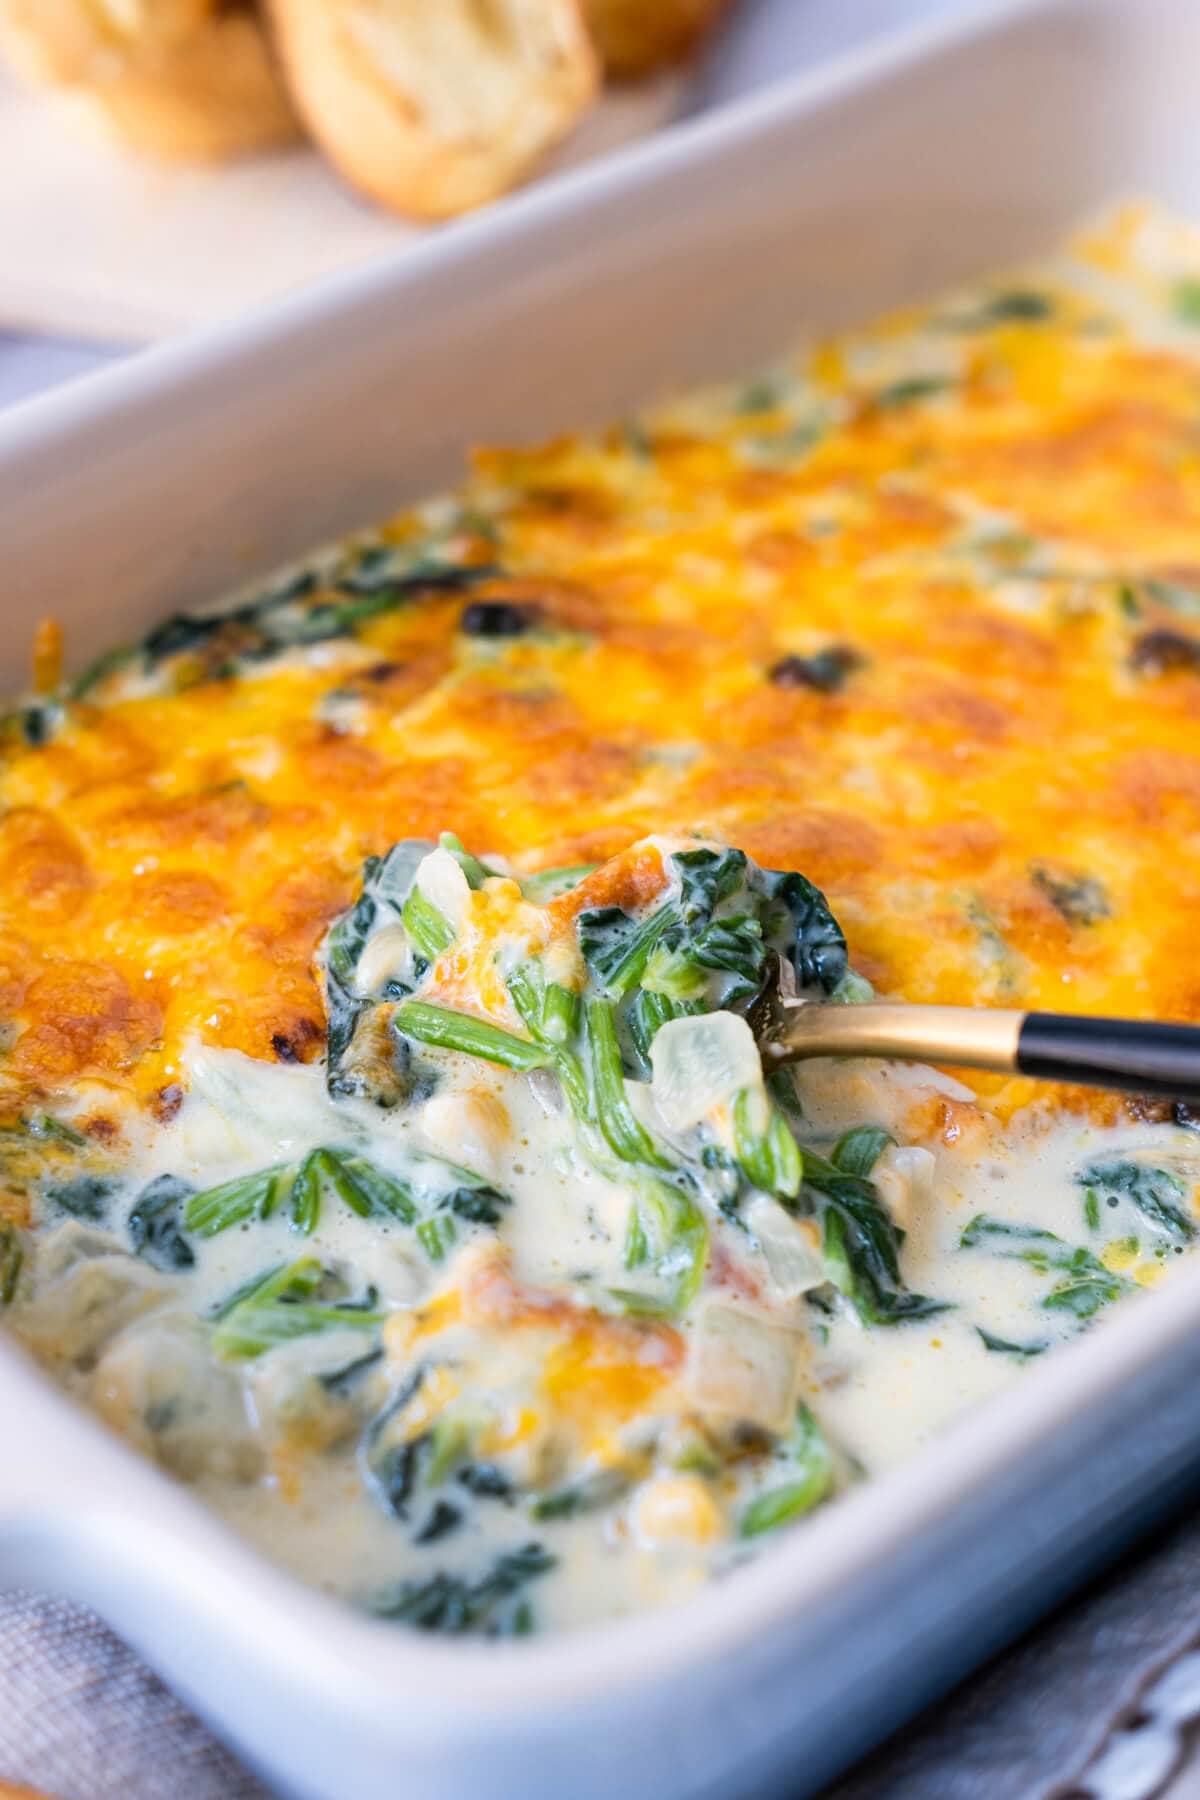 Spinach loaded with cheese flavor and creamy sauce in the baking dish with some bread next to it.